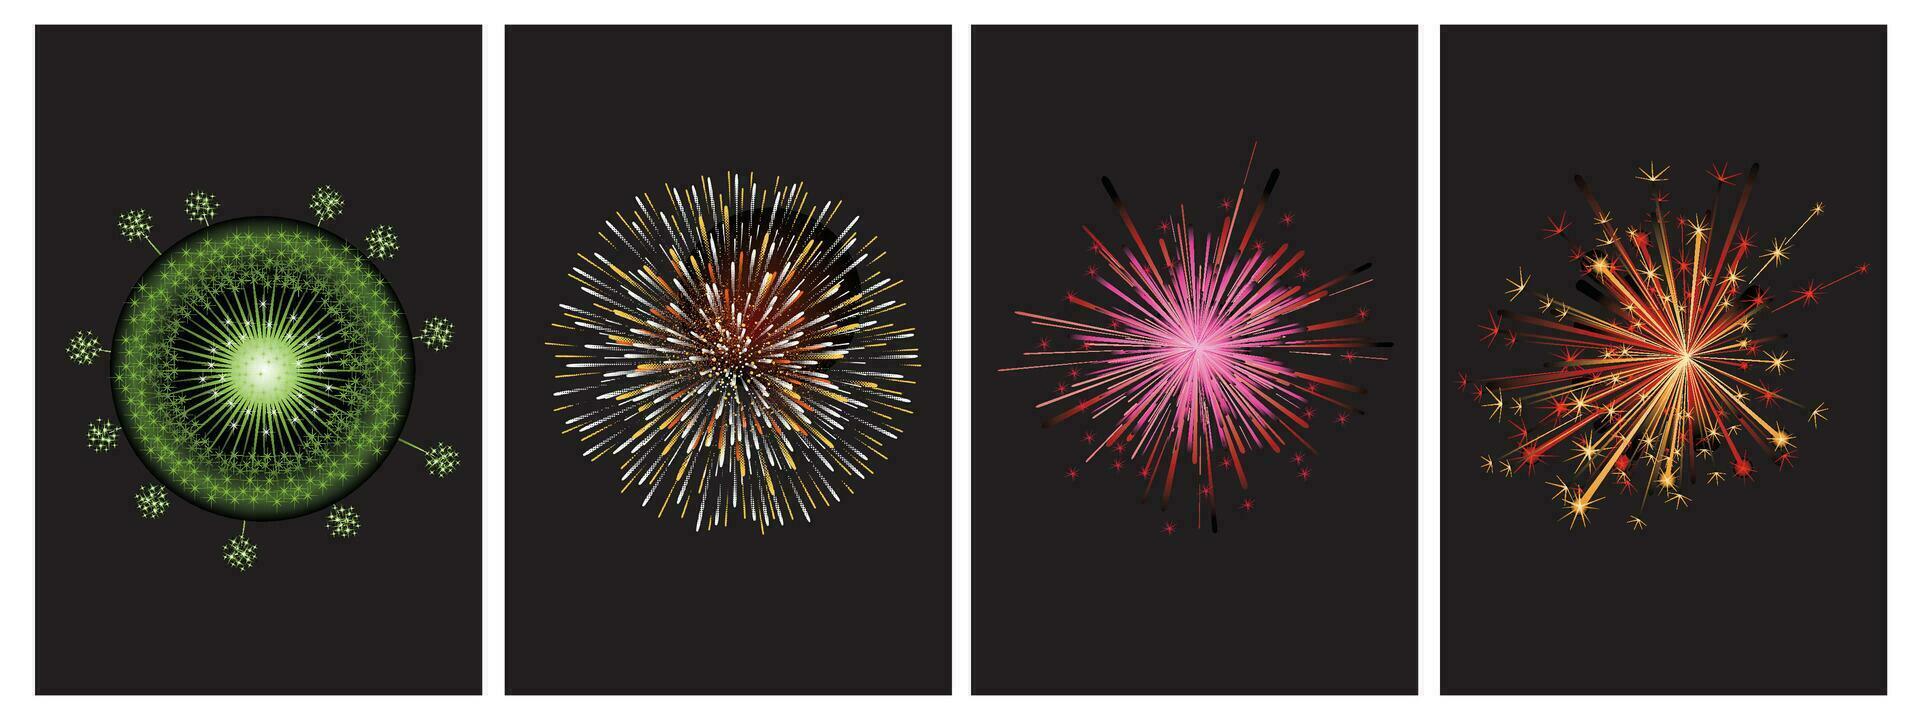 fireworks set. Festive patterned fireworks explode in various shapes sparkling pictograms with checkered background abstract vector isolated illustration